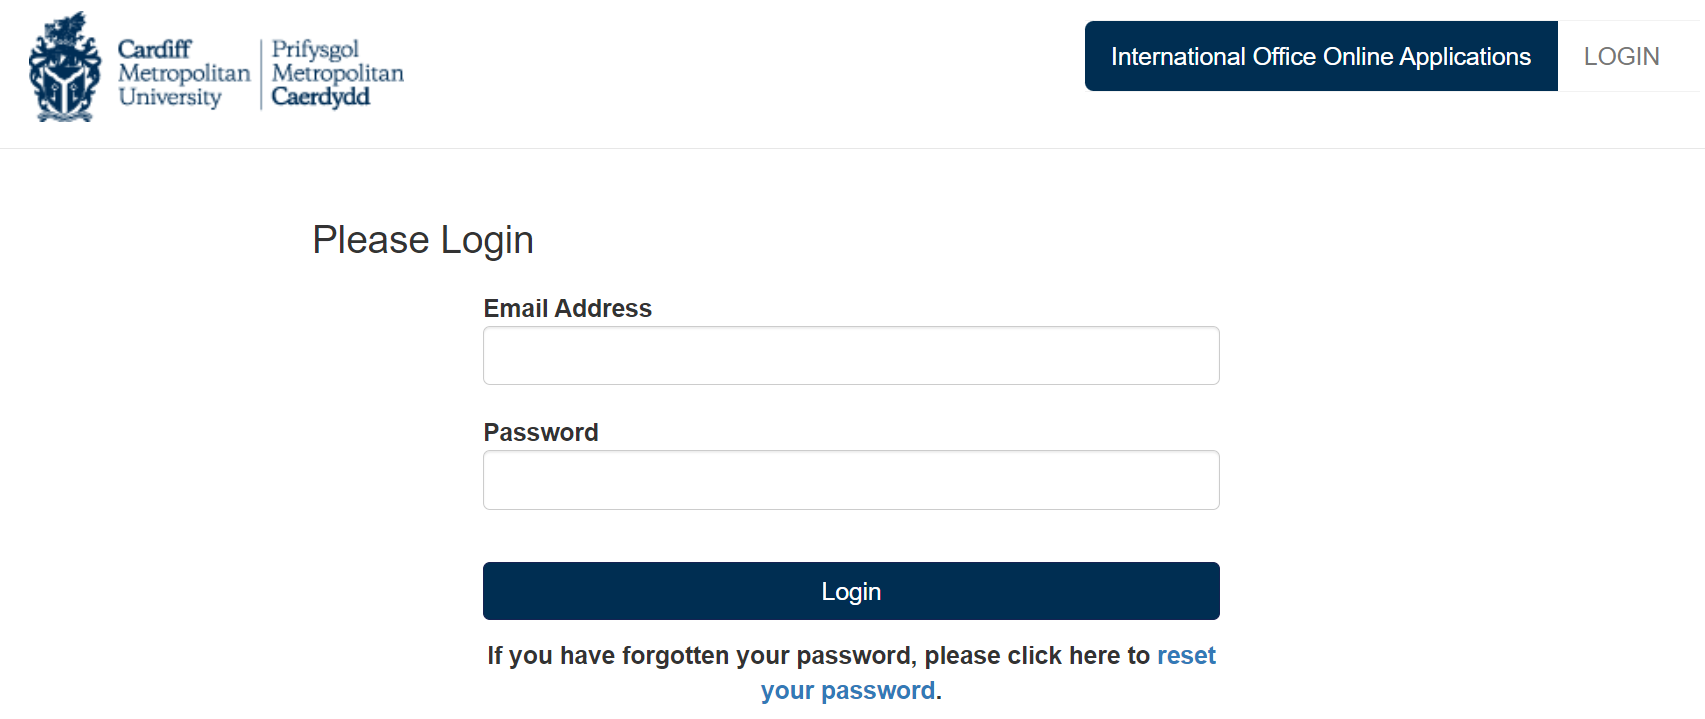 How to Login to the Cardiff met student portal